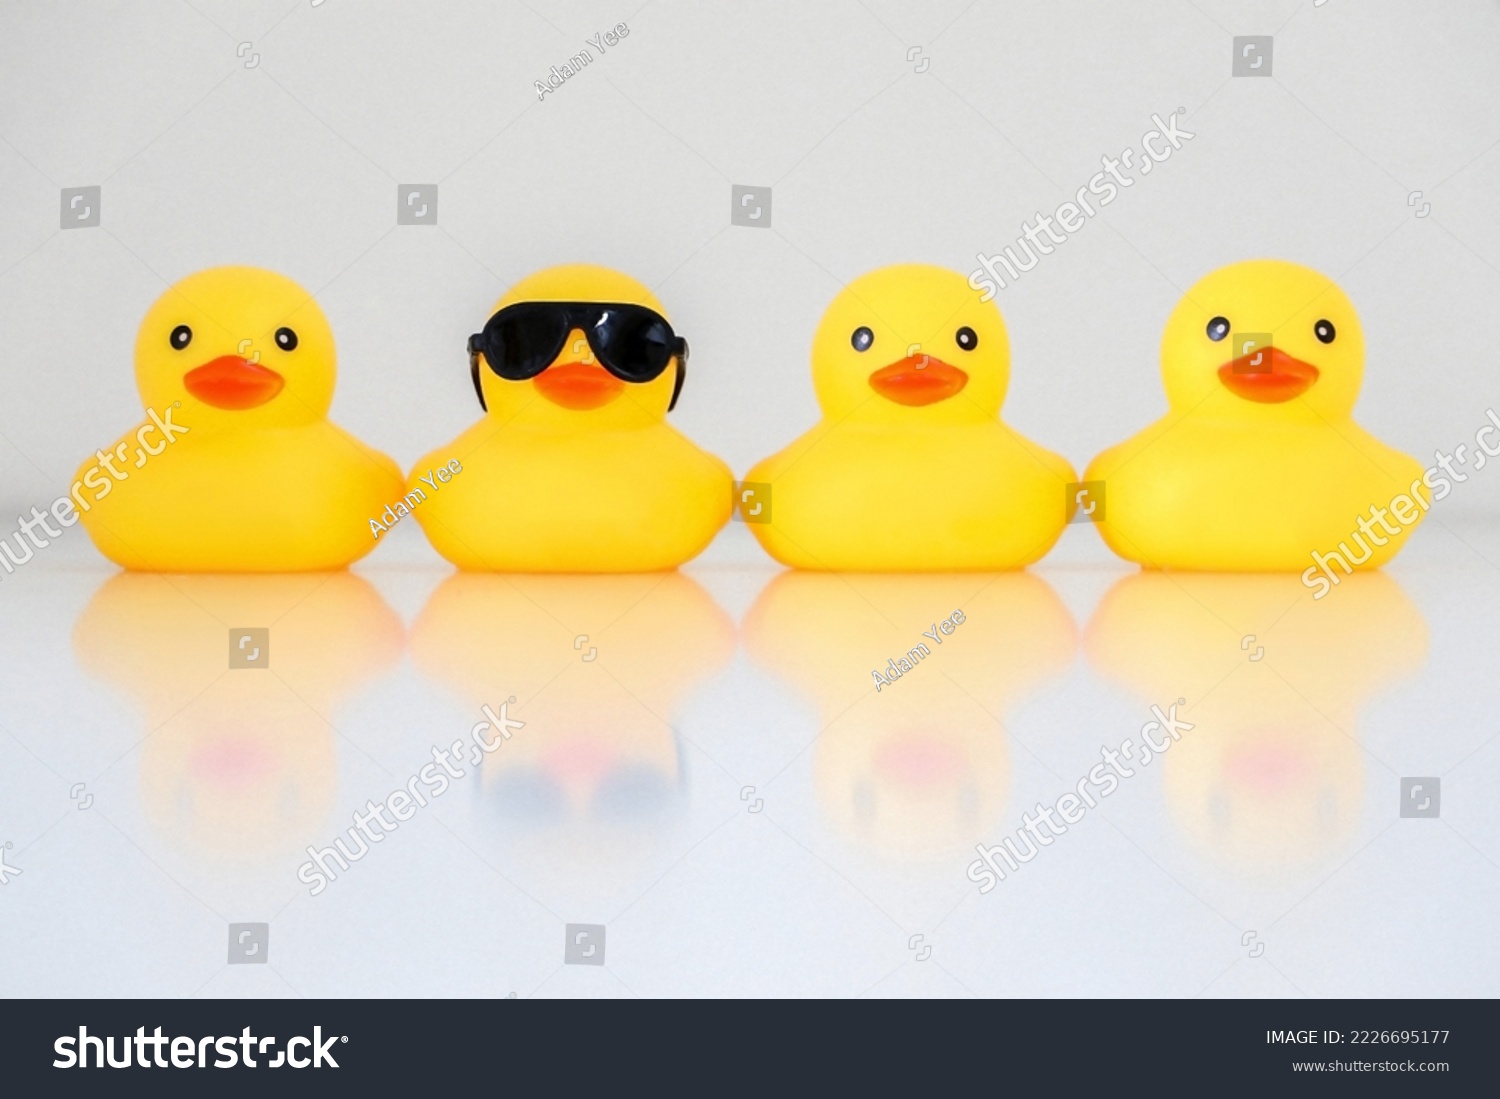 Four yellow rubber ducks in a row, one standing out wearing black sunglasses, with reflection, organisation concept, get one’s ducks in a row. White background. #2226695177